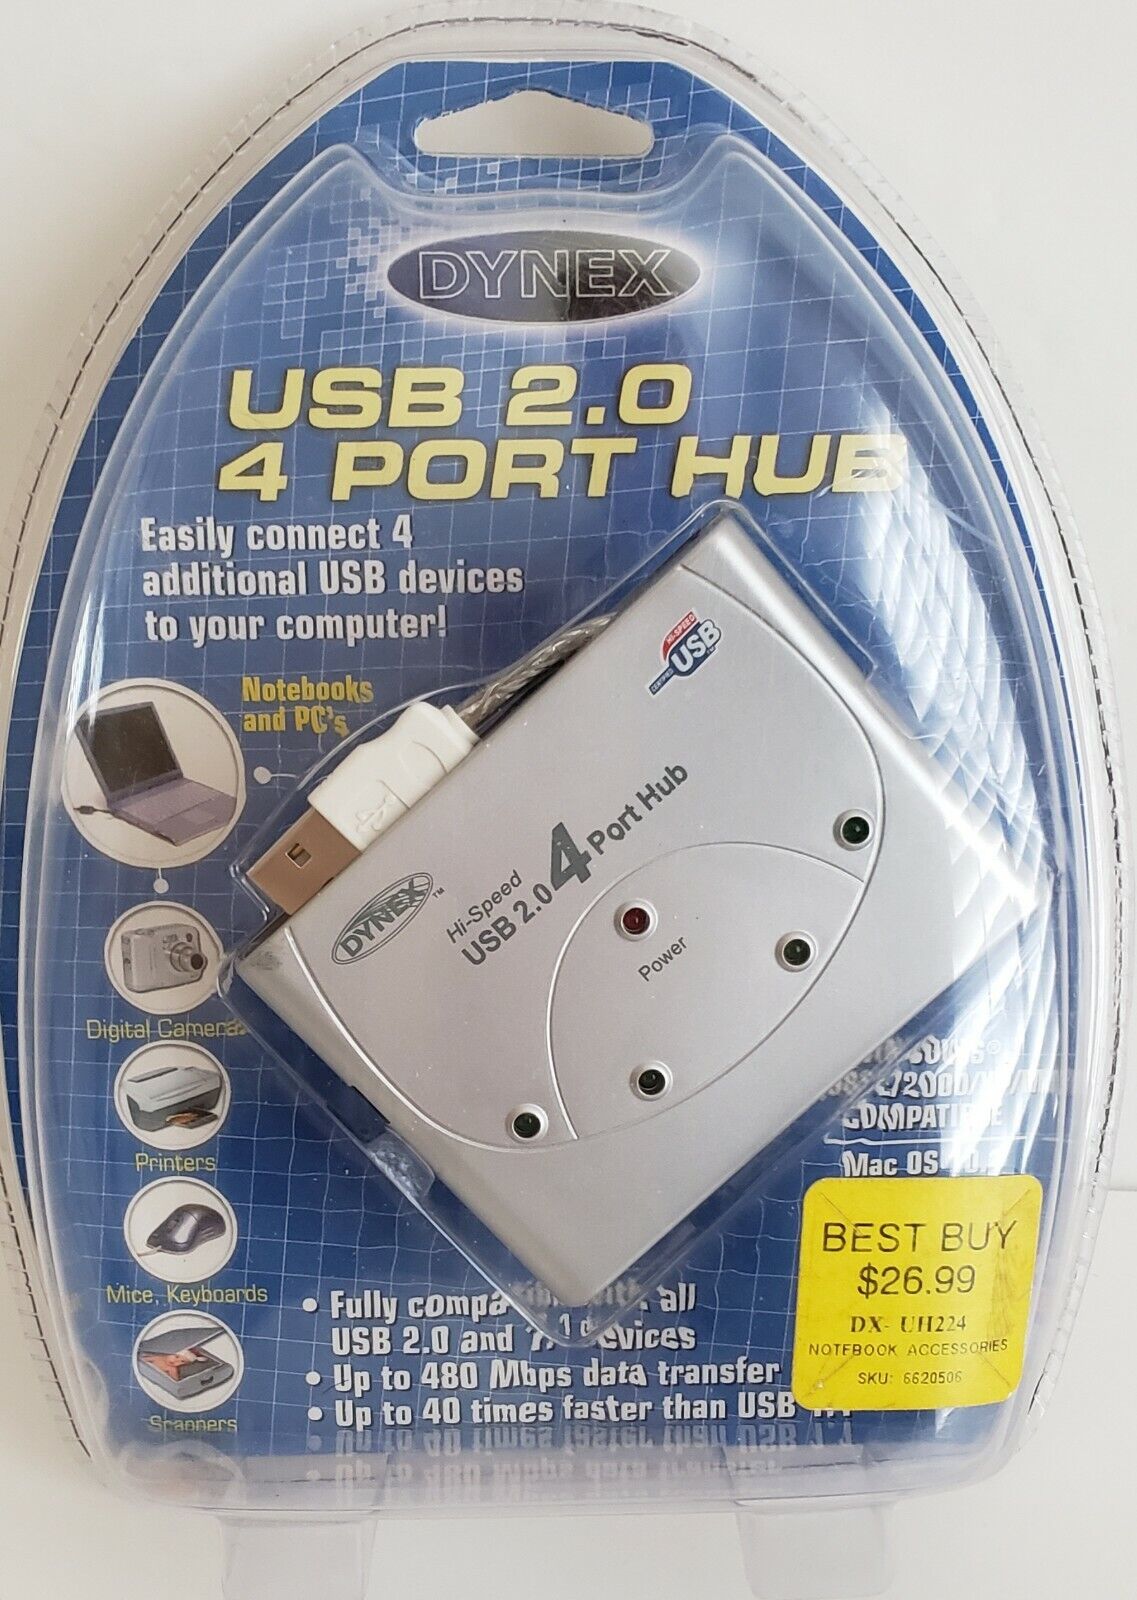 NEW IN PACKAGE DYNEX USB 2.0 - 4 PORT HUB MODEL DX-UH224 